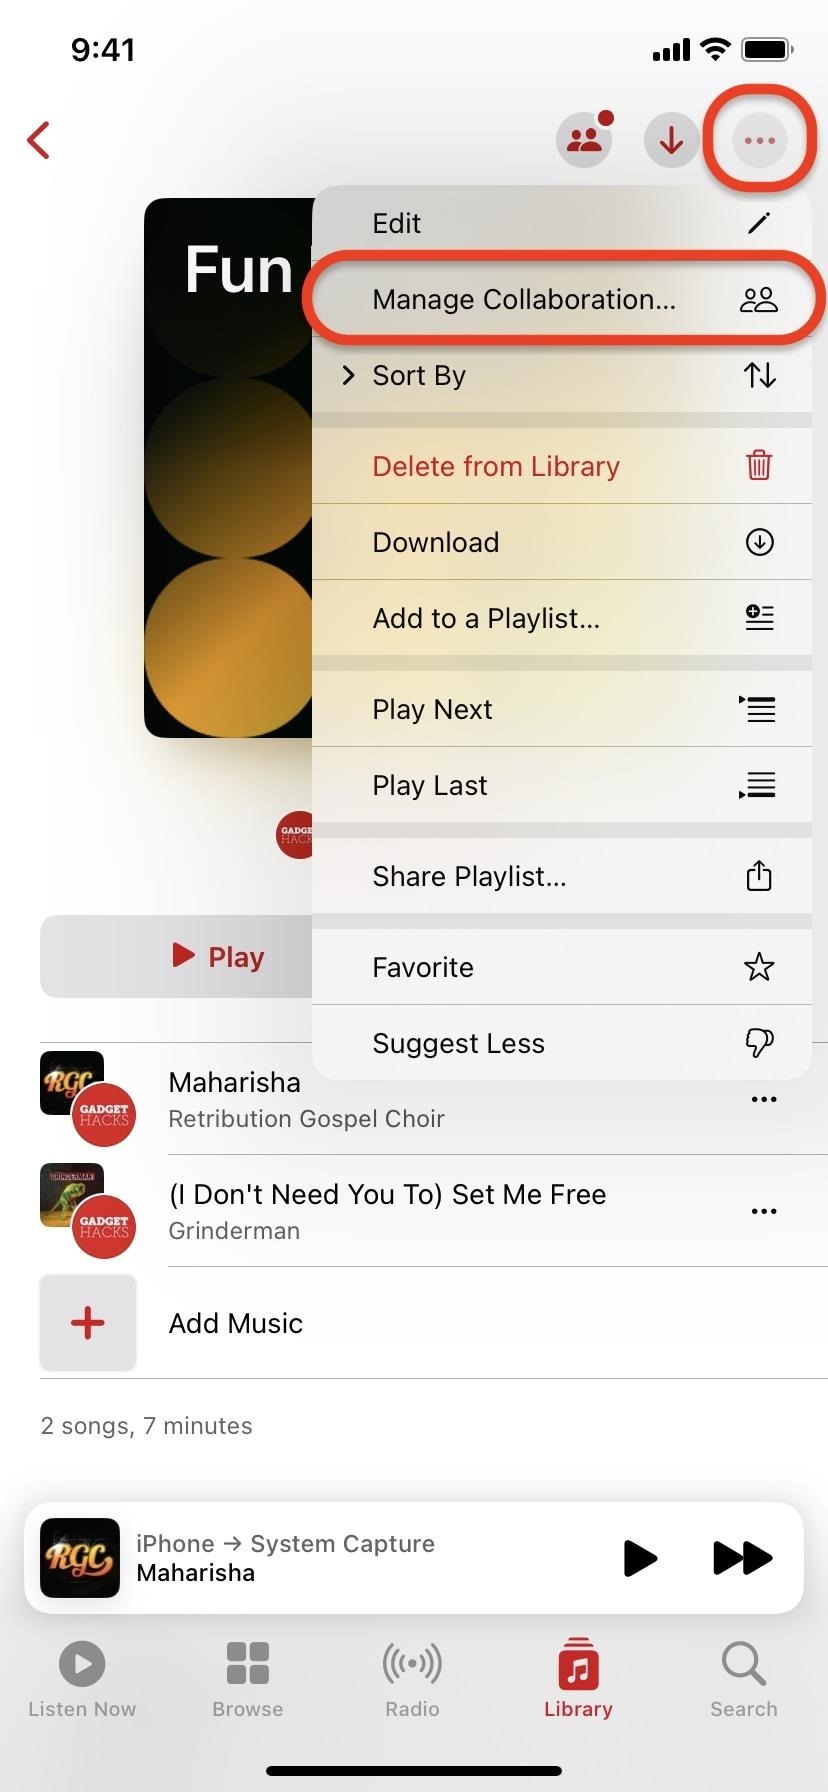 How to Create and Use Collaborative Playlists on Apple Music with Your Friends (Works on iPhone, Android, and More)